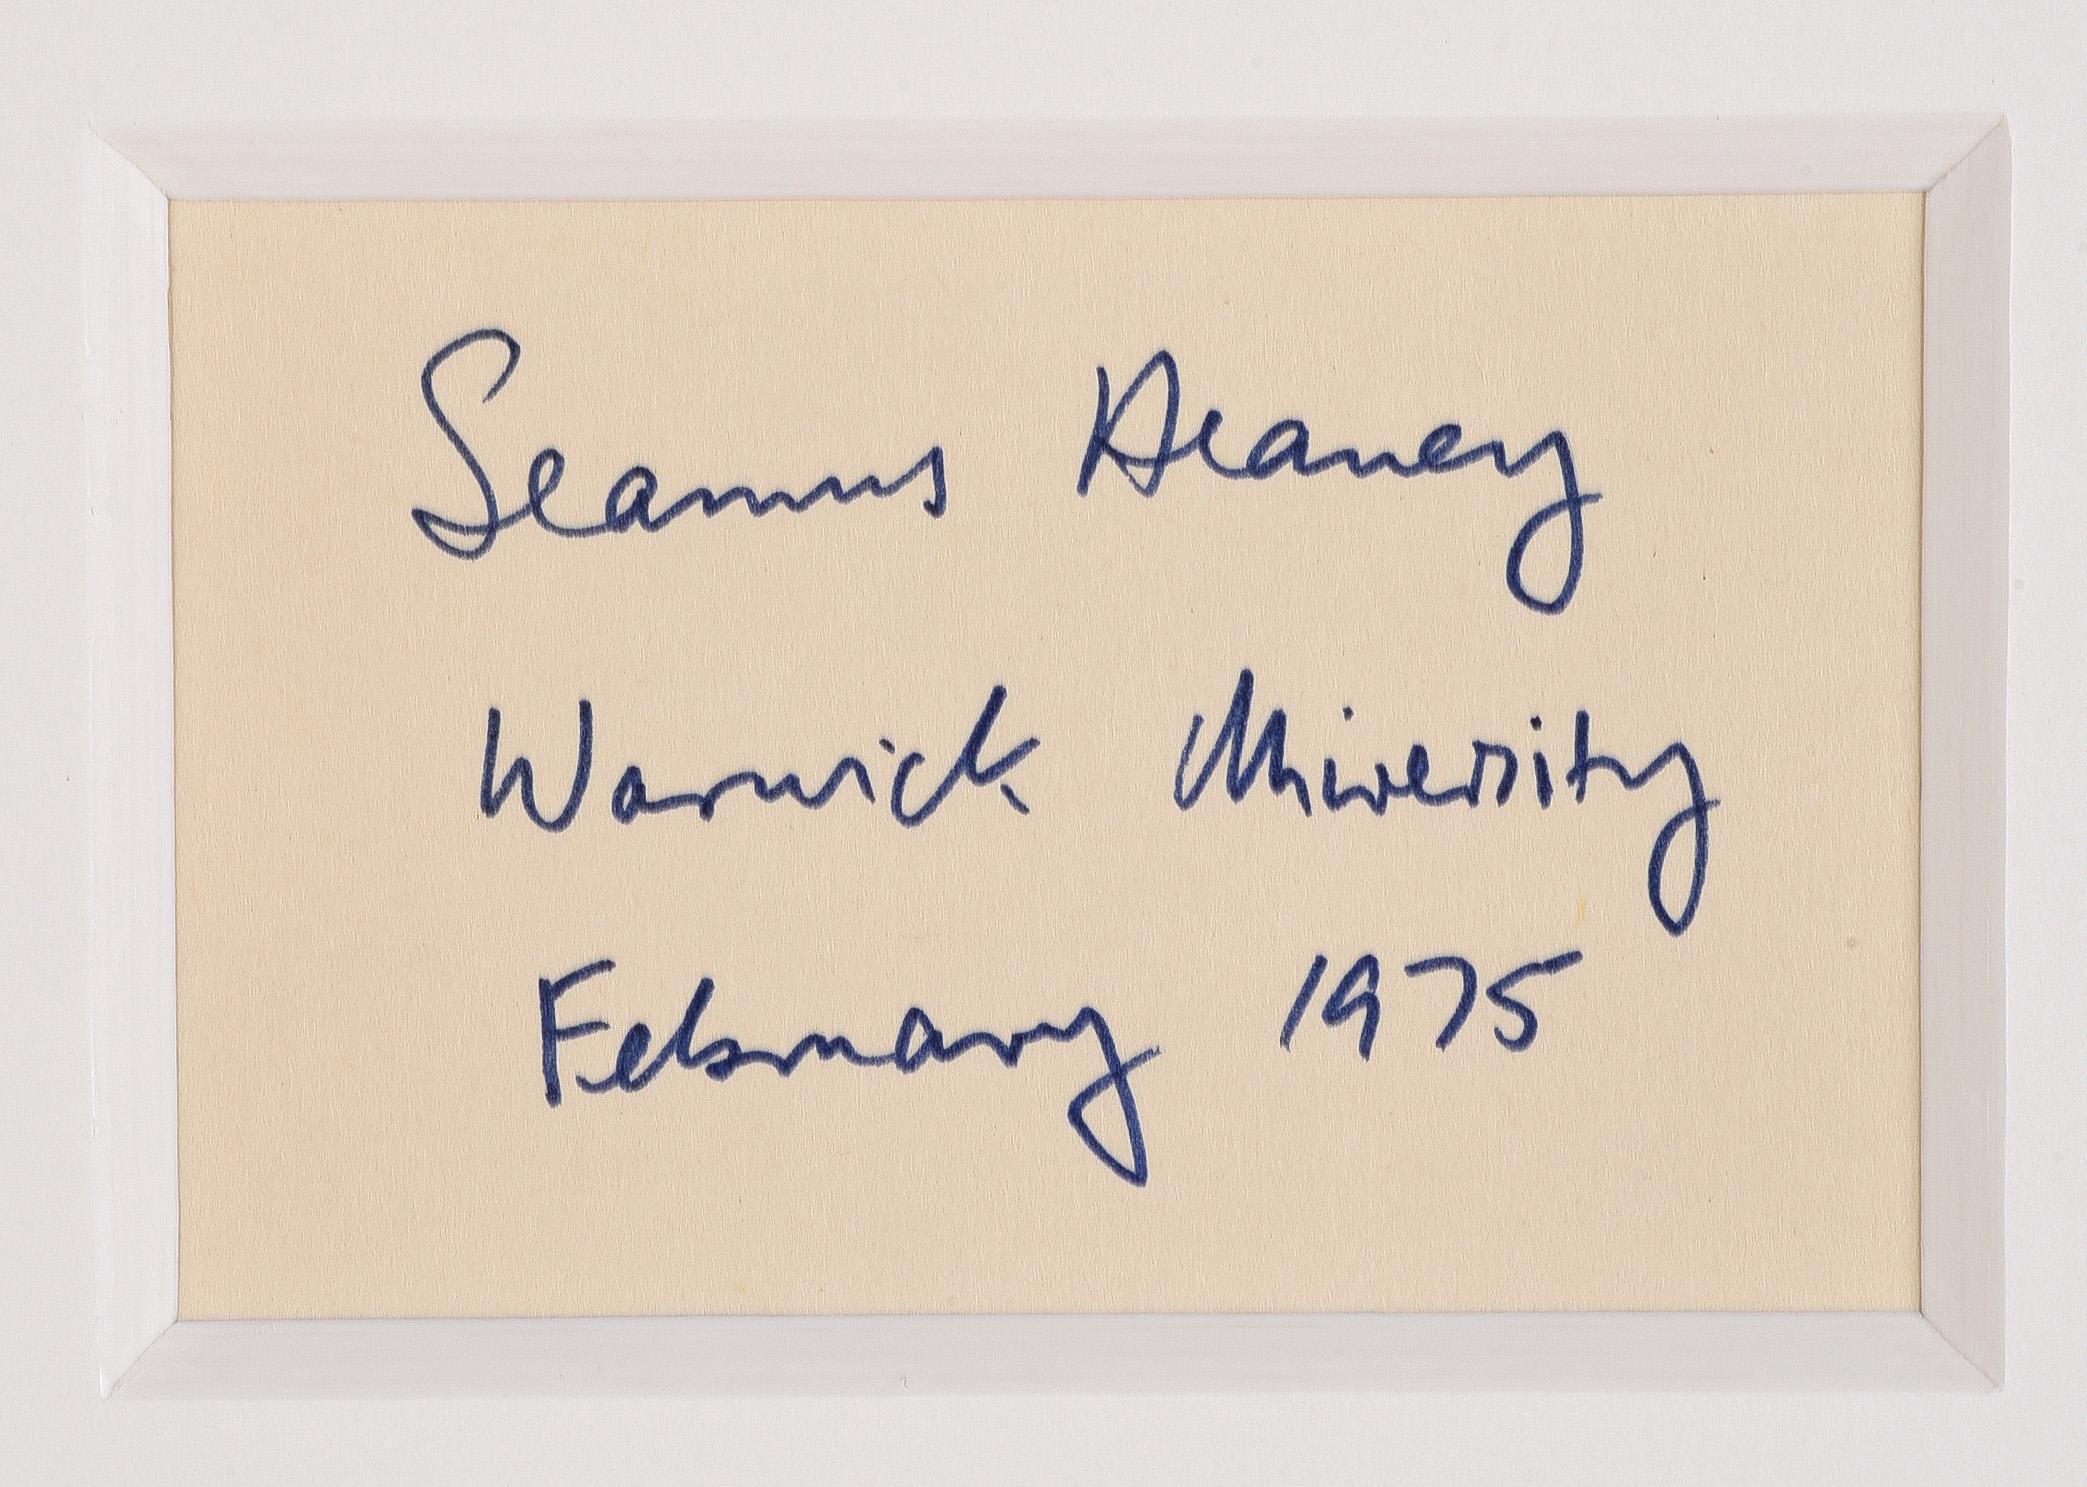 Seamus Heaney, 'Death of Naturalist & Digging' In Excellent Condition For Sale In Great Britain, Northern Ireland